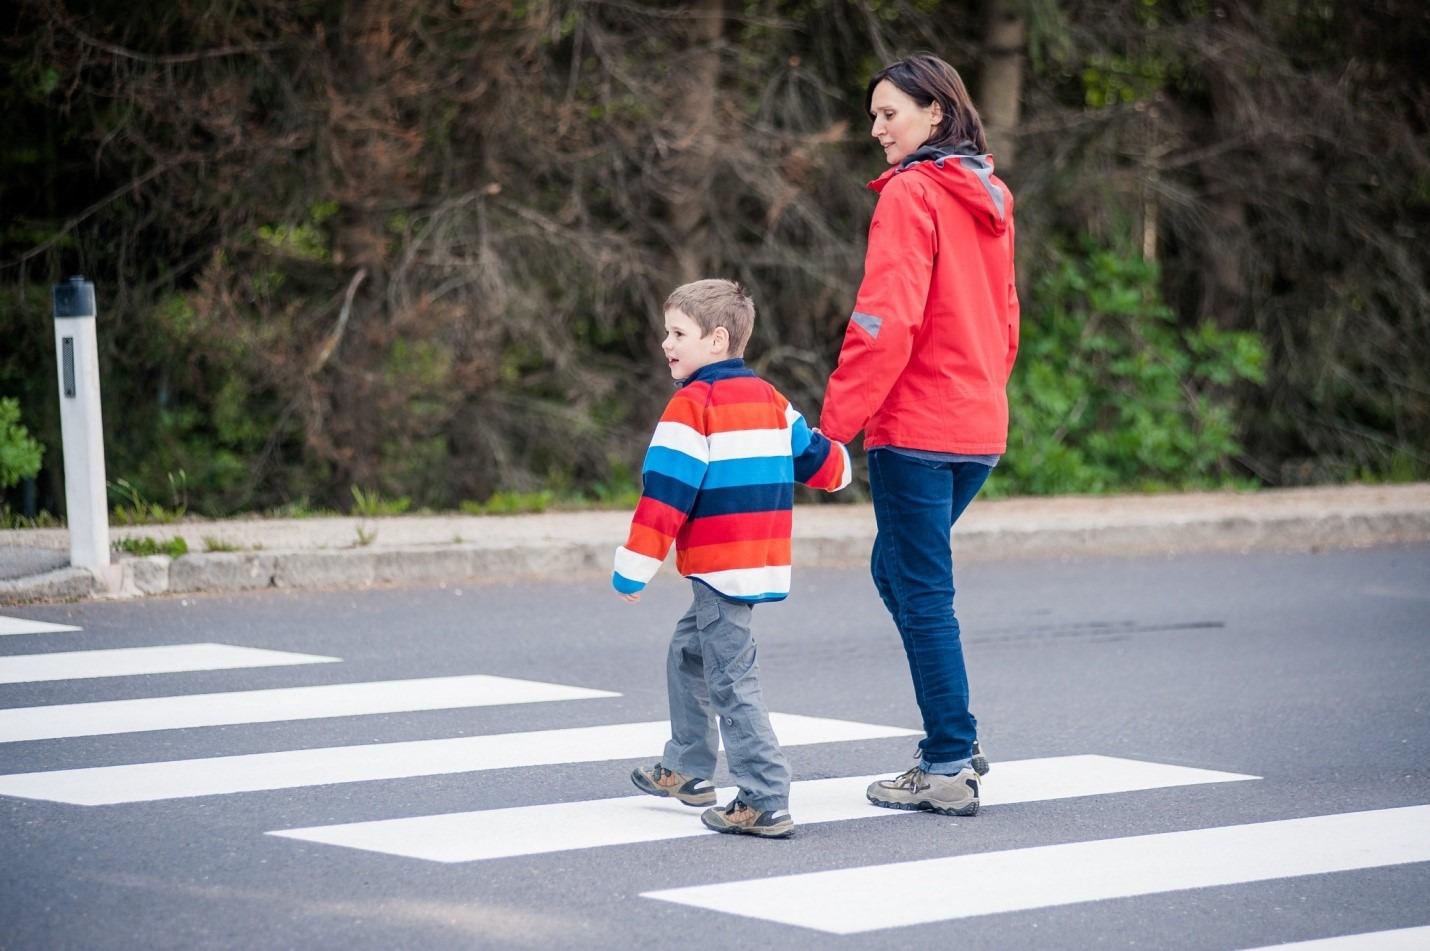 Top Tips for Pedestrian Safety on the Road